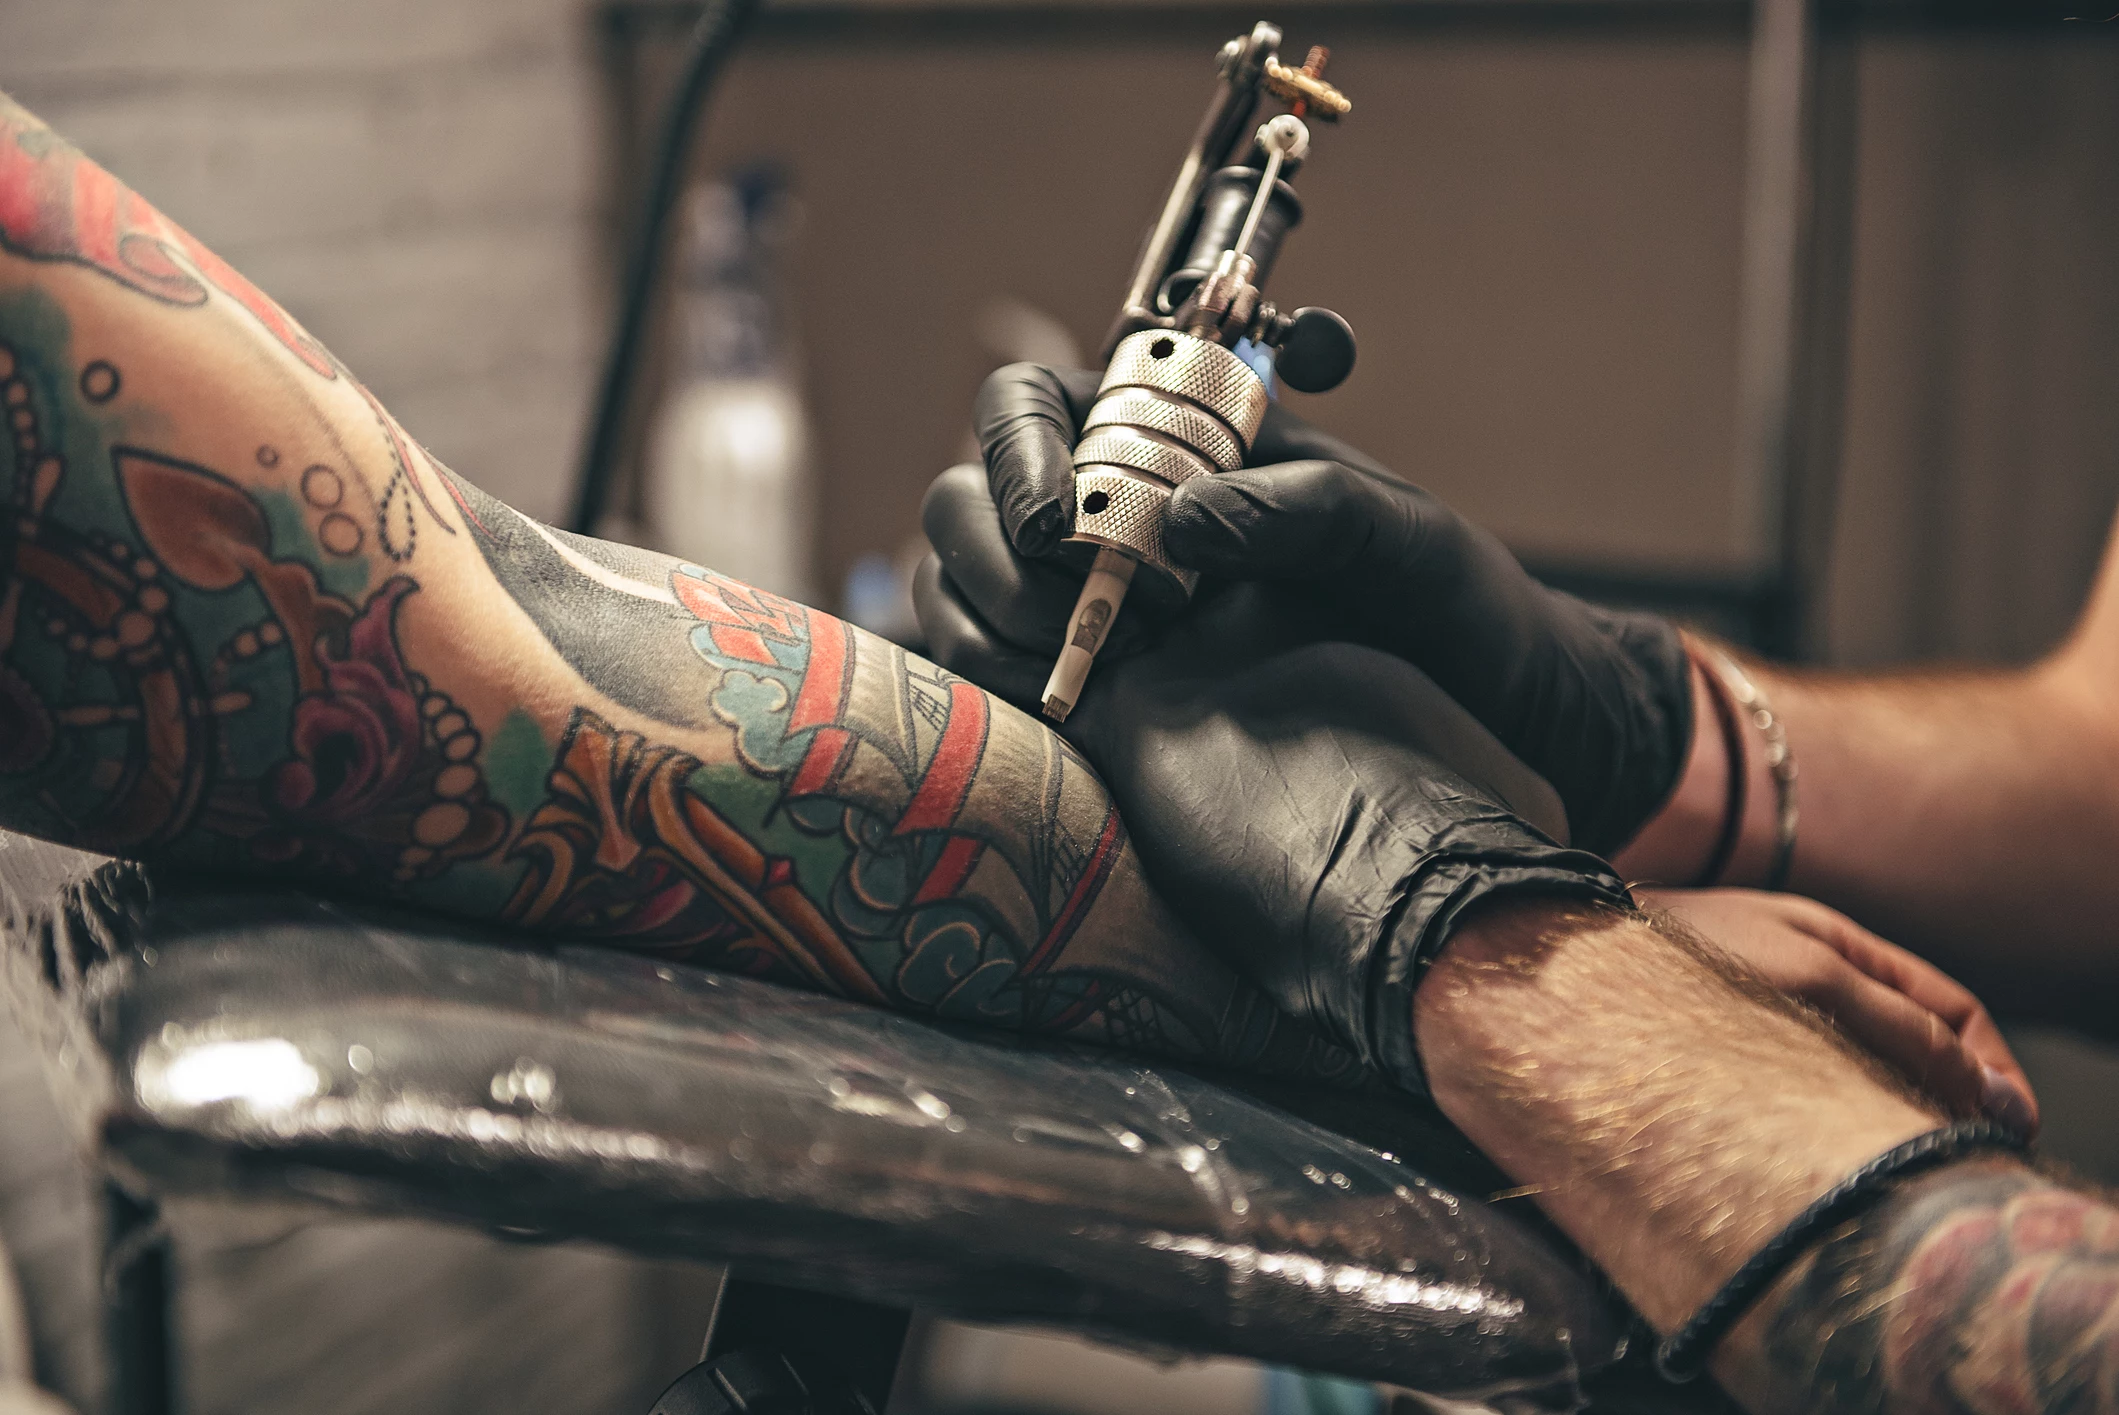 Meet The El Paso Tattoo Artist From Channel 5 YouTube Video